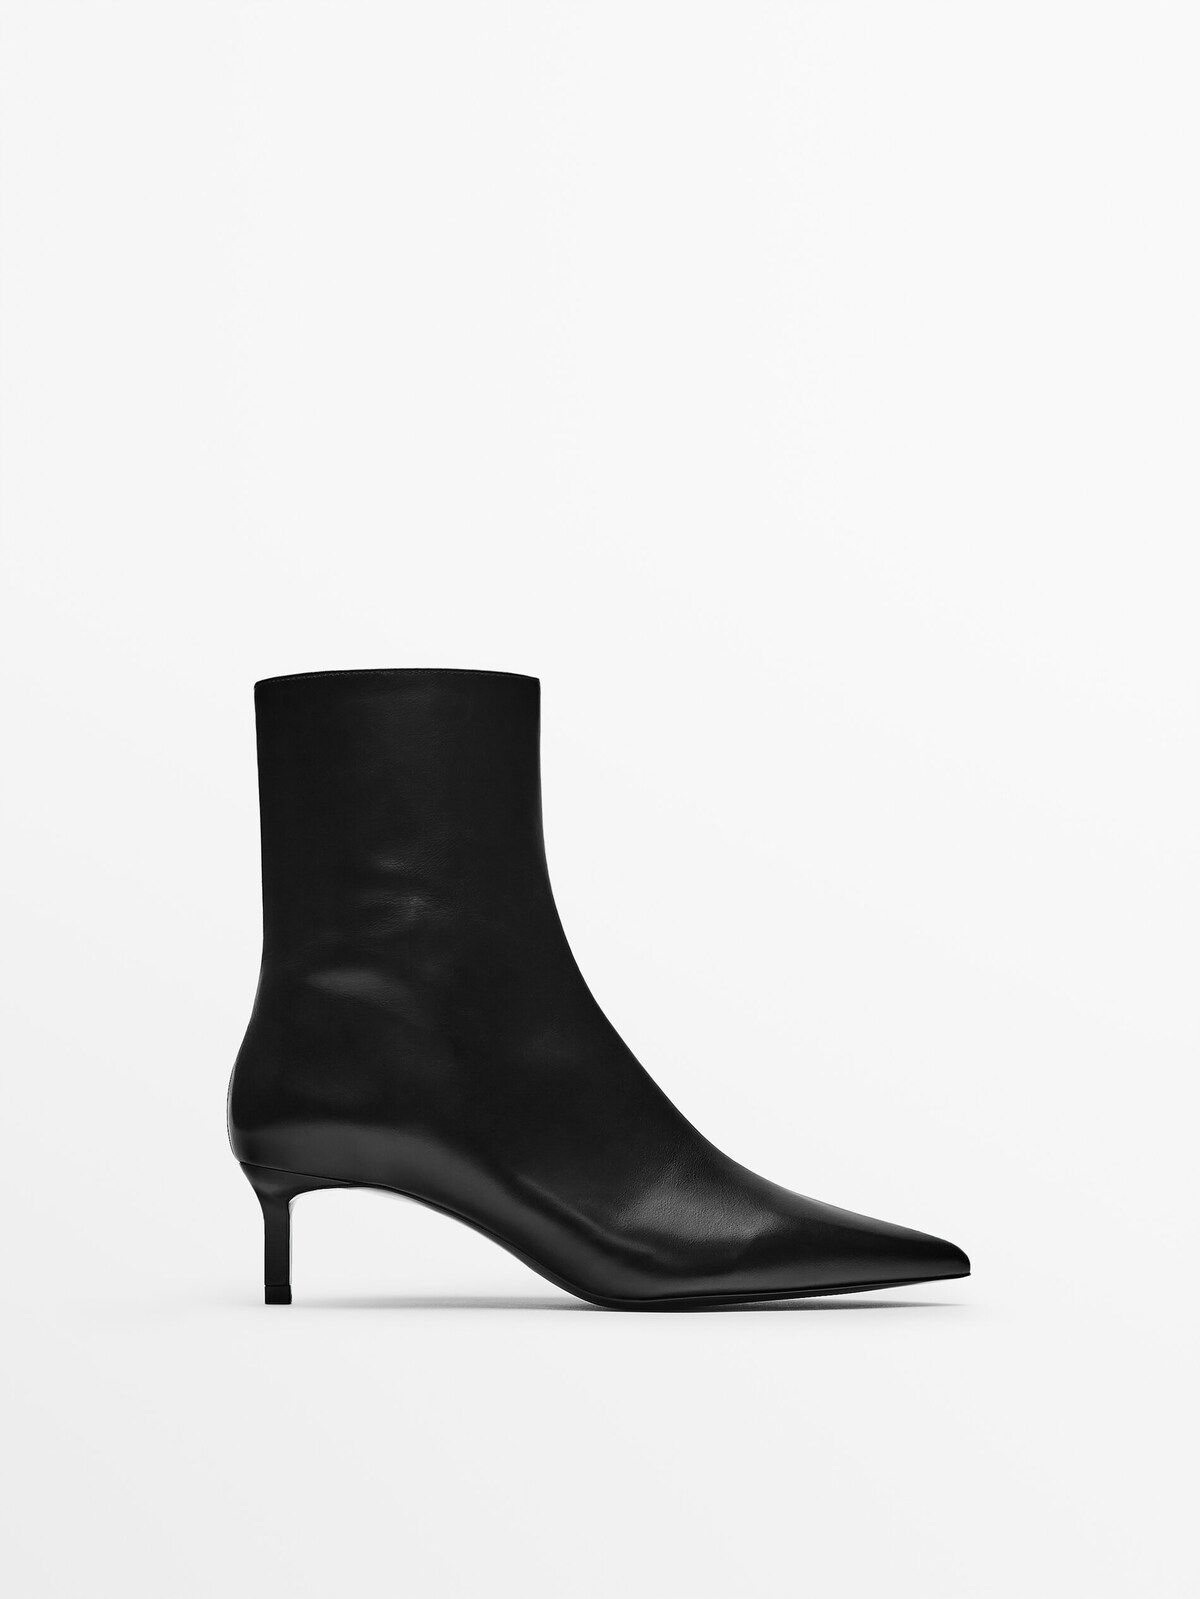 Leather high heel ankle boots | Massimo Dutti (US)